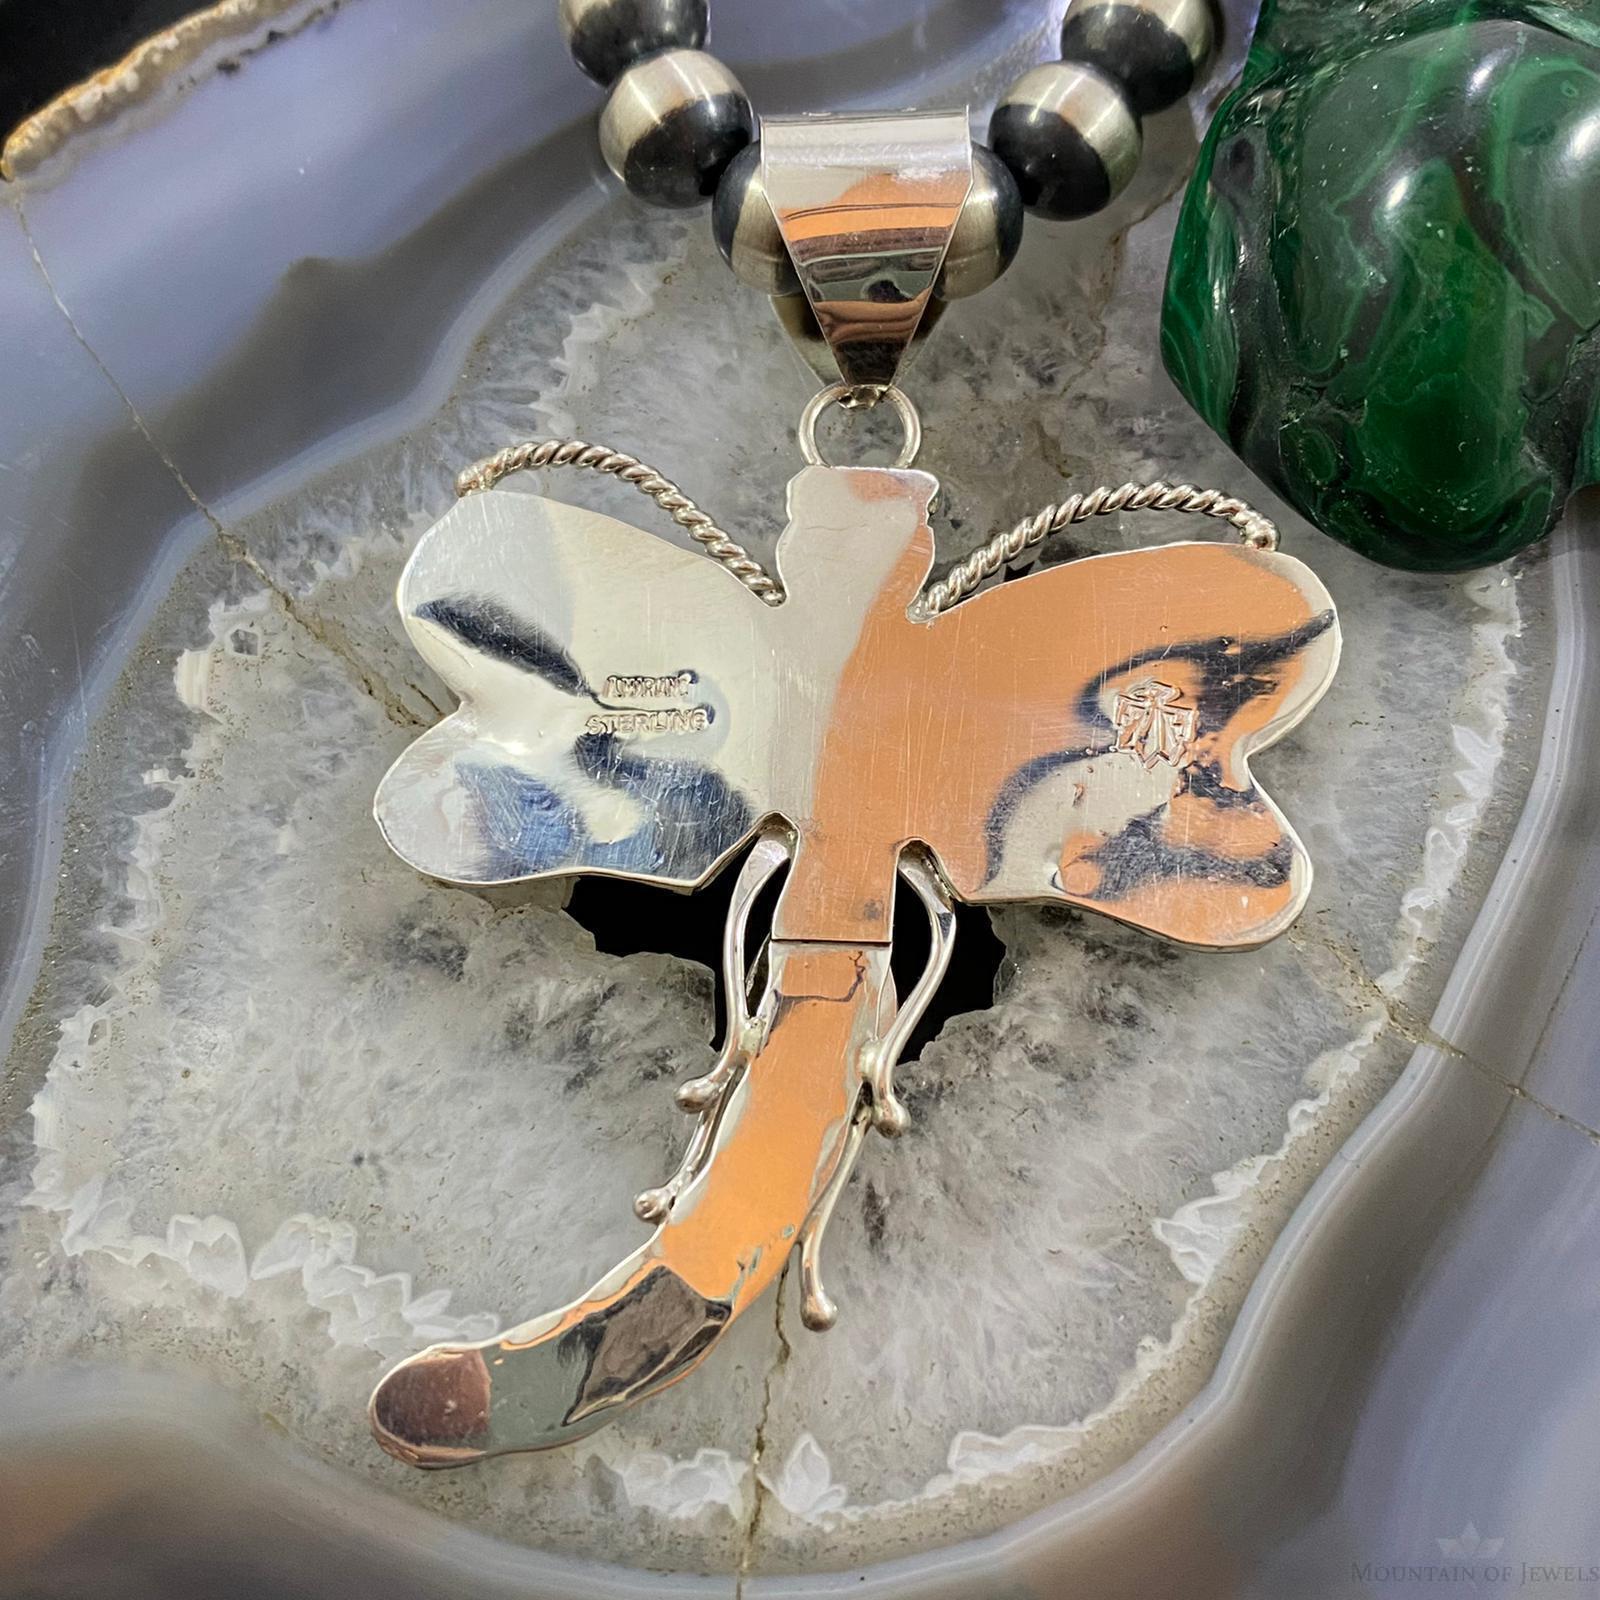 Alonzo Mariano Native American Sterling Kingman Turquoise Dragonfly Pendant - Mountain of Jewels